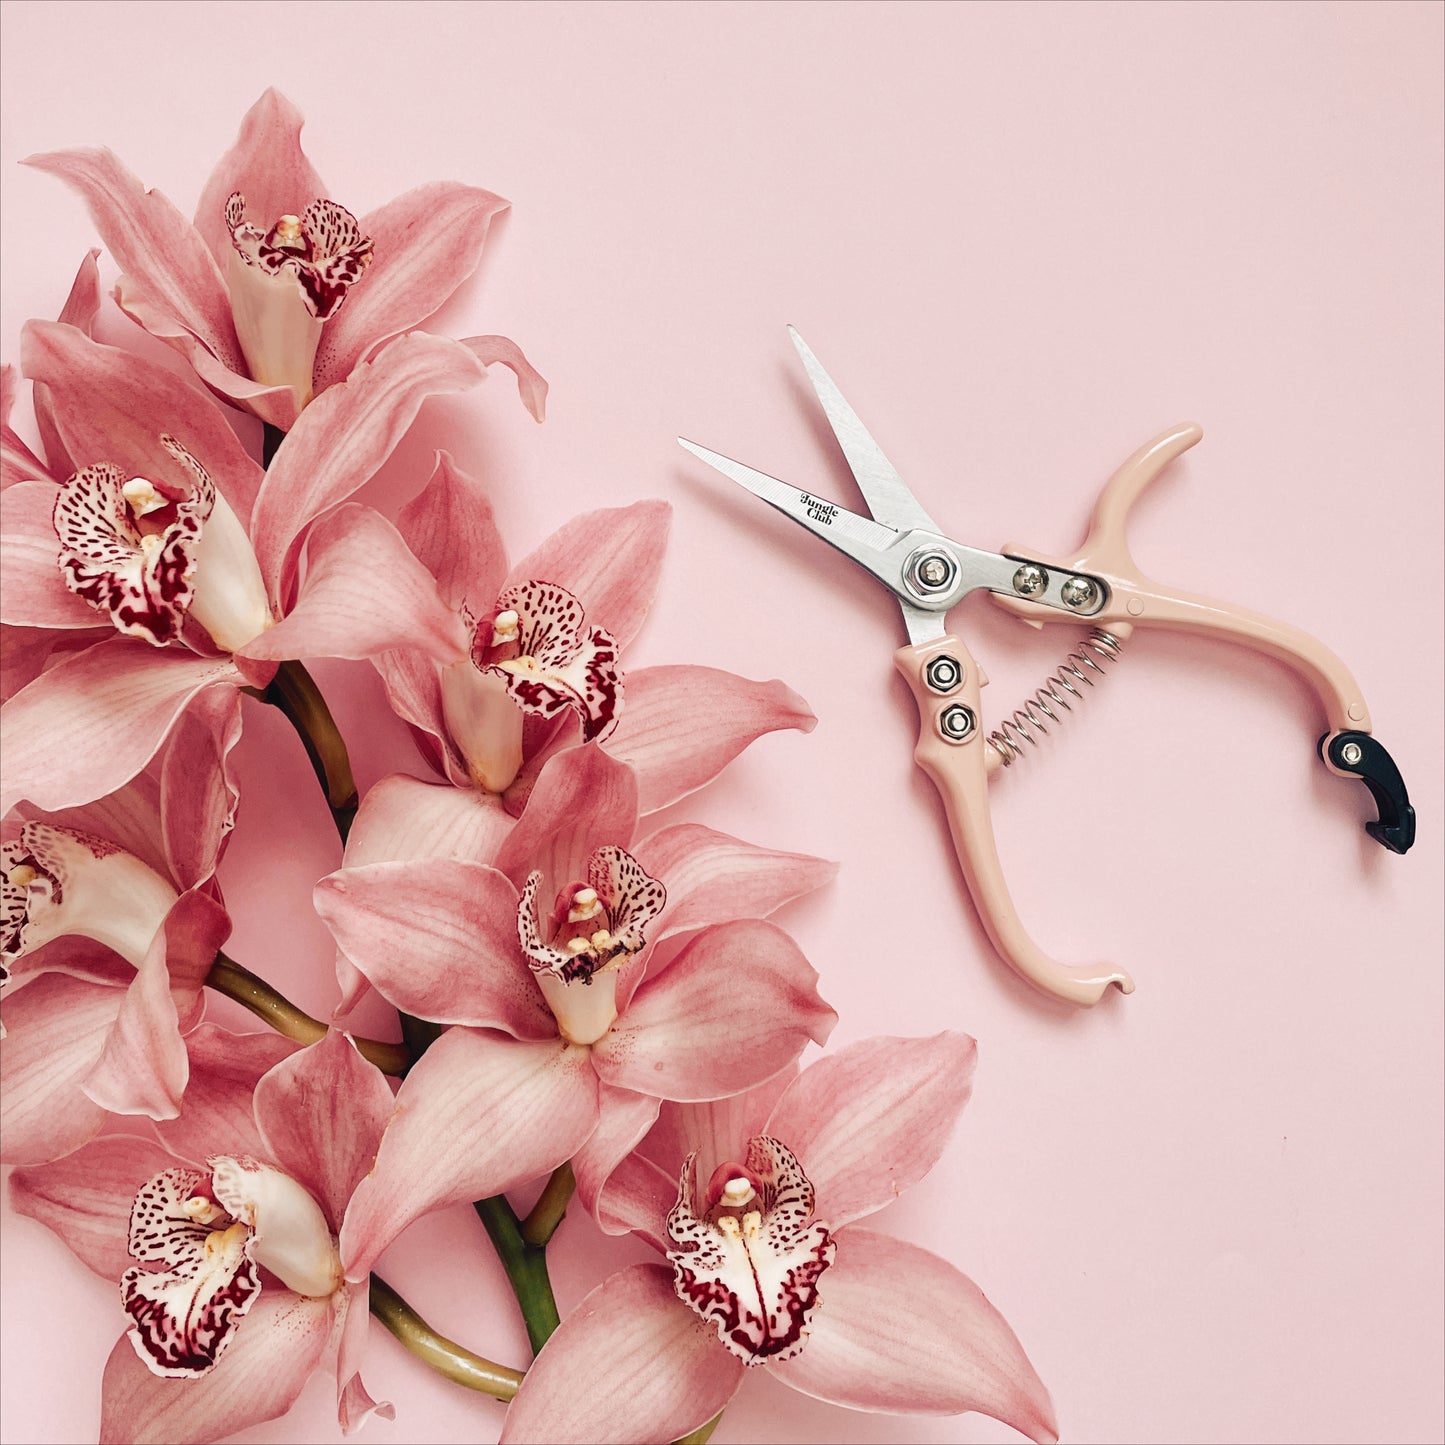 Pair of pruning shears with pastel pink handles and metal blades. The outer blade reads 'jungle club' in small, playful lettering. The pruning shears have a black clasp at the top of the handles to secure them closed. In this photograph, they're staged on a pink background and next to tropical pink flowers.